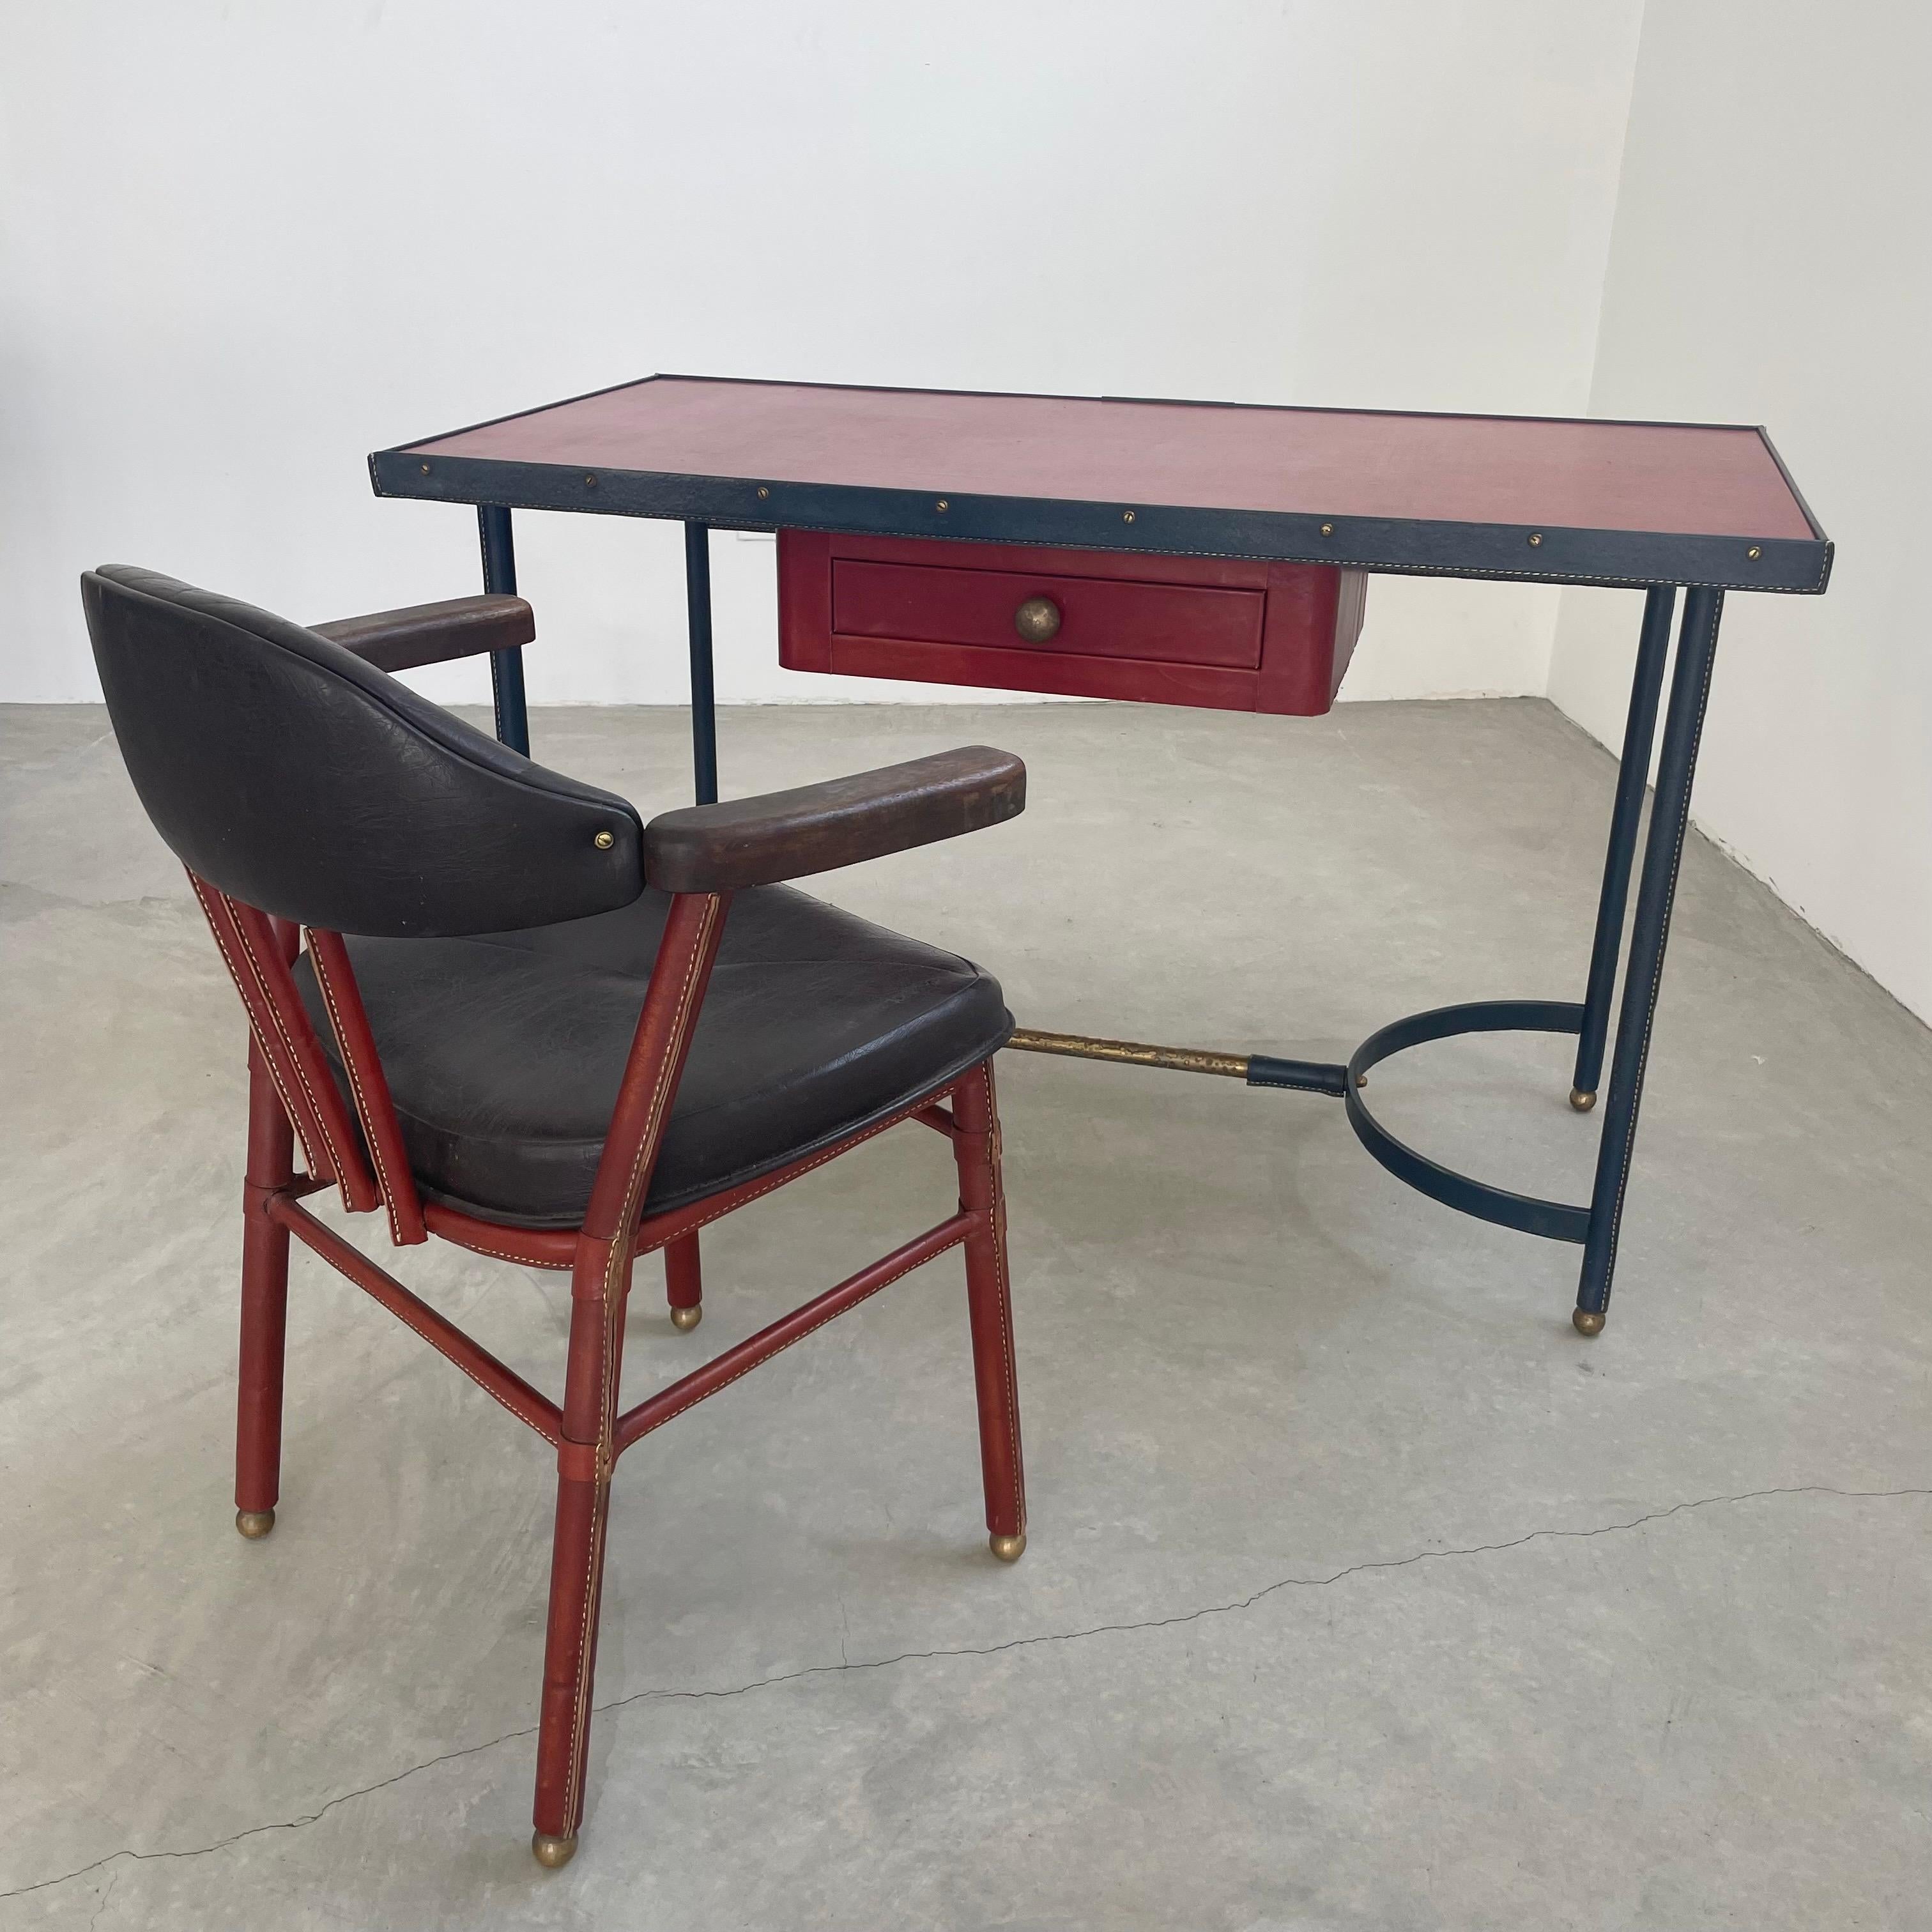 Exceptional Art Deco era desk with matching chair by French modernist designer Jacques Adnet. Entire desk is wrapped in leather. Iron frame with 4 posts, inverted u-shaped bases and brass support bar/foot rest connecting the two. Heavy iron frame